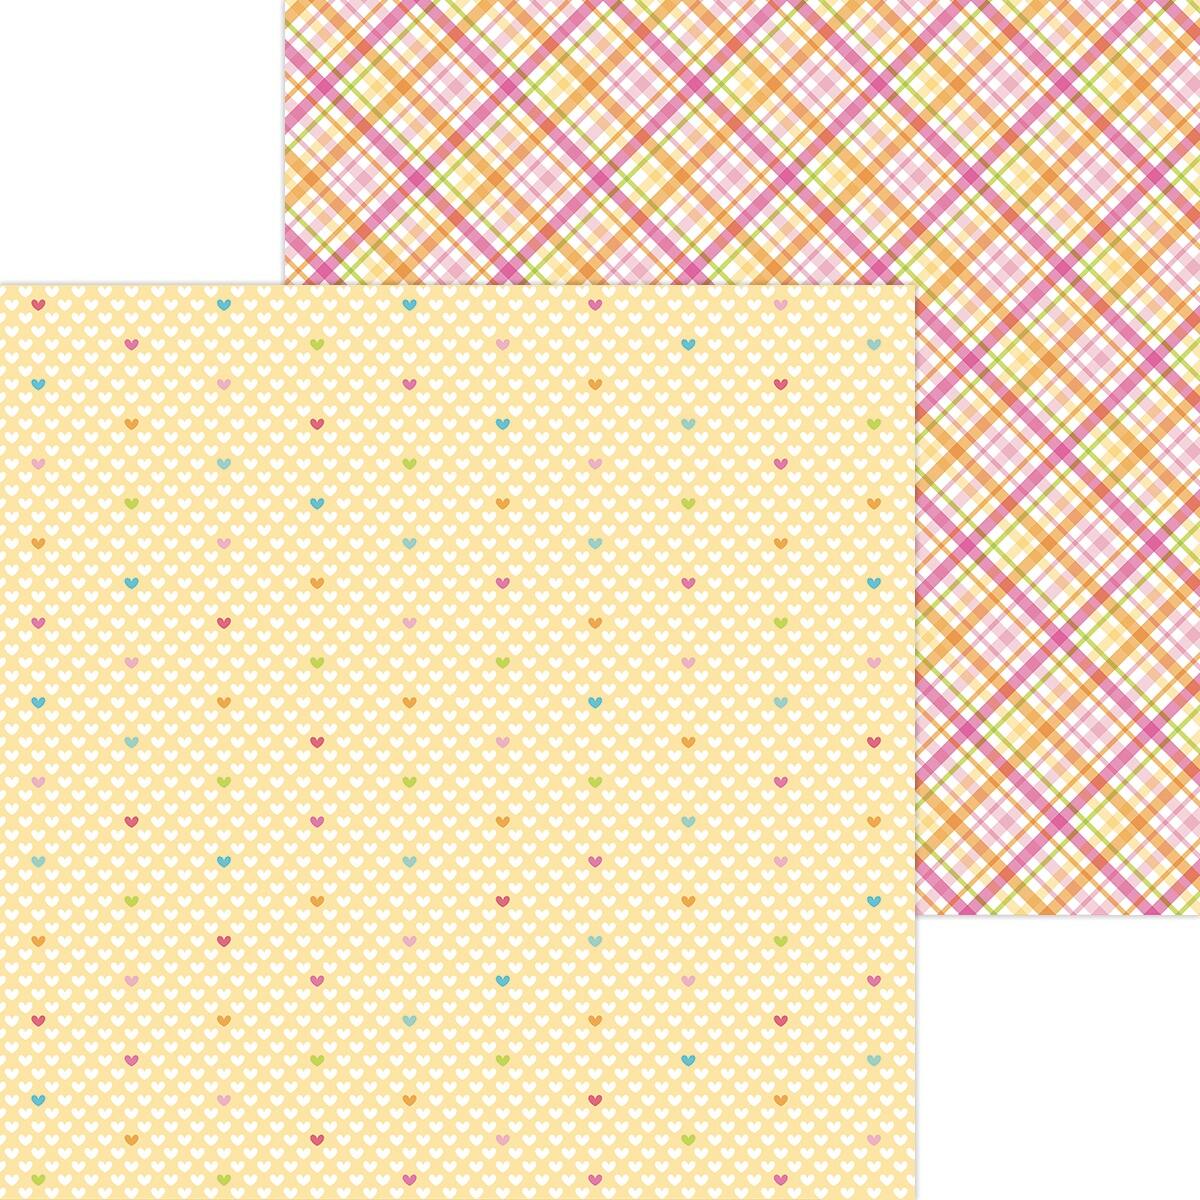 Doodlebug Design - Cute and Crafty Collection - 12 x 12 Paper Pack